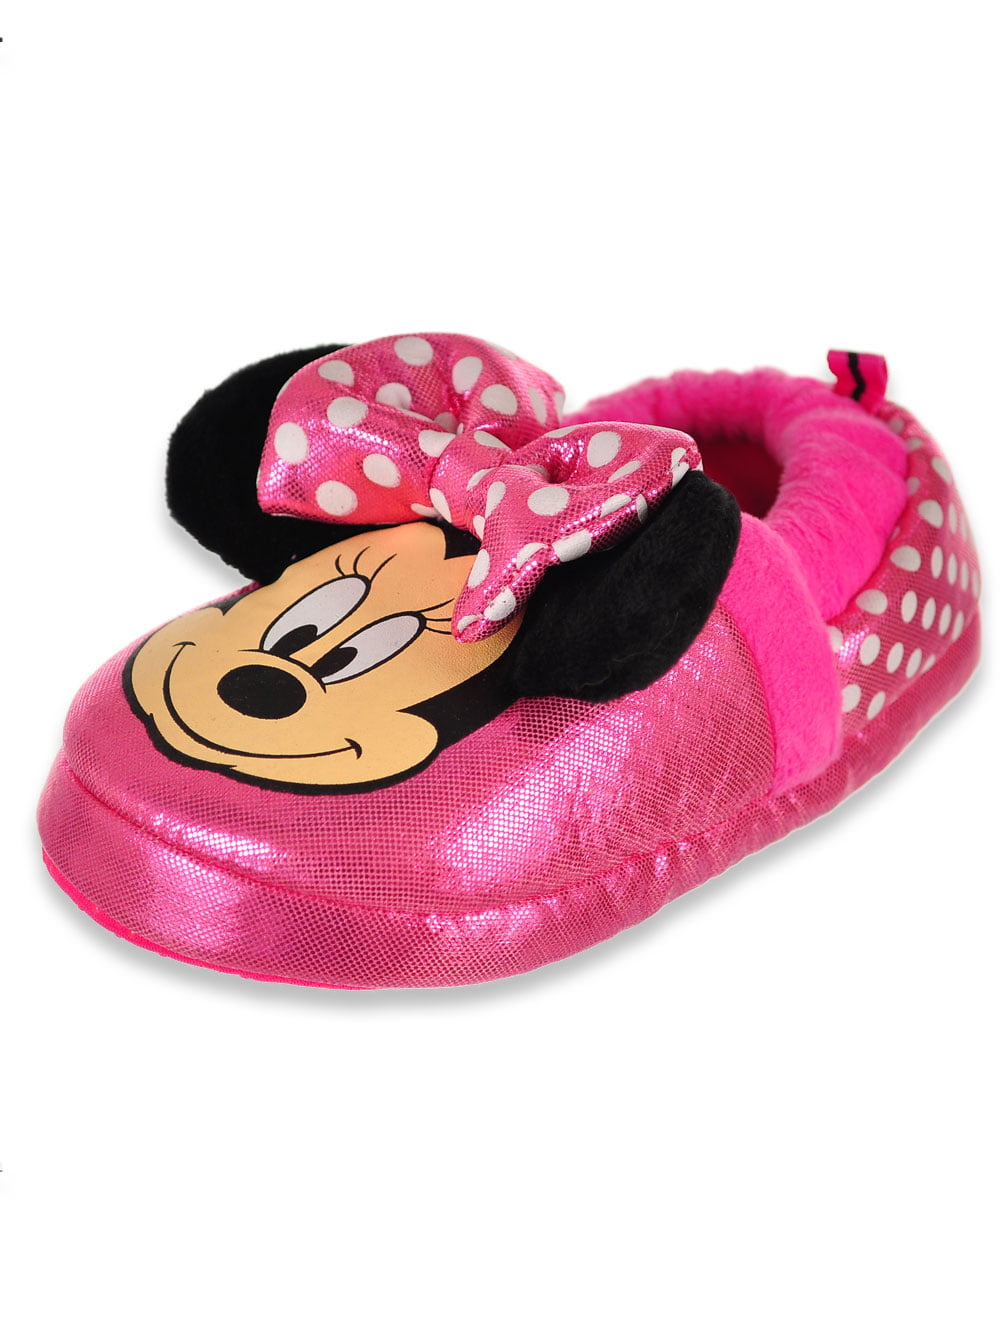 Disney Boys and Girls Soft Plush Slip-On Slippers Minnie and Mickey Mouse 